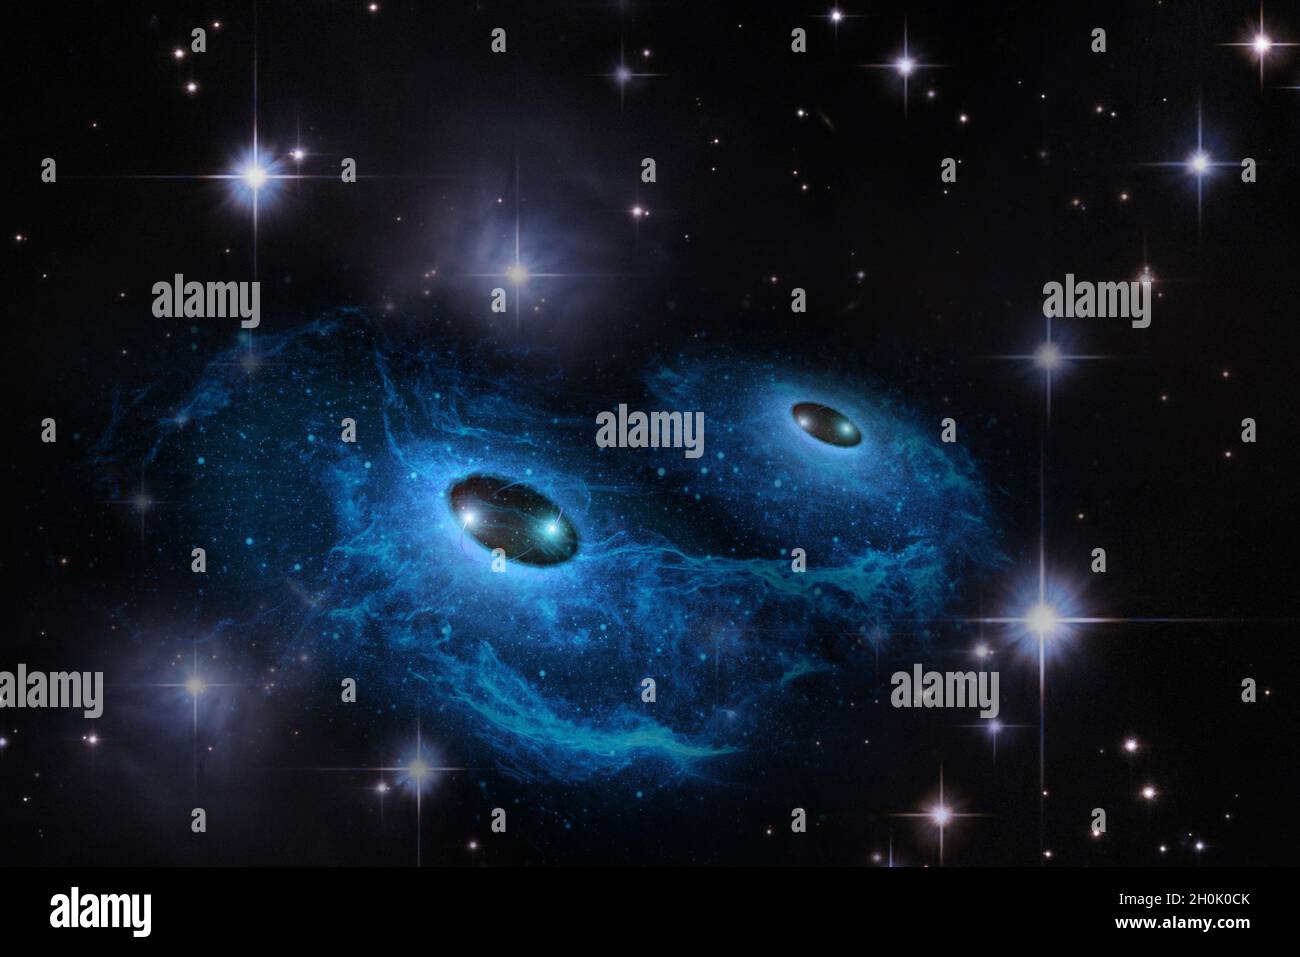 Abstract space wallpaper. Pair of two black holes with nebula over stars and cloud fields in outer space. Elements of this image furnished by NASA. Stock Photo